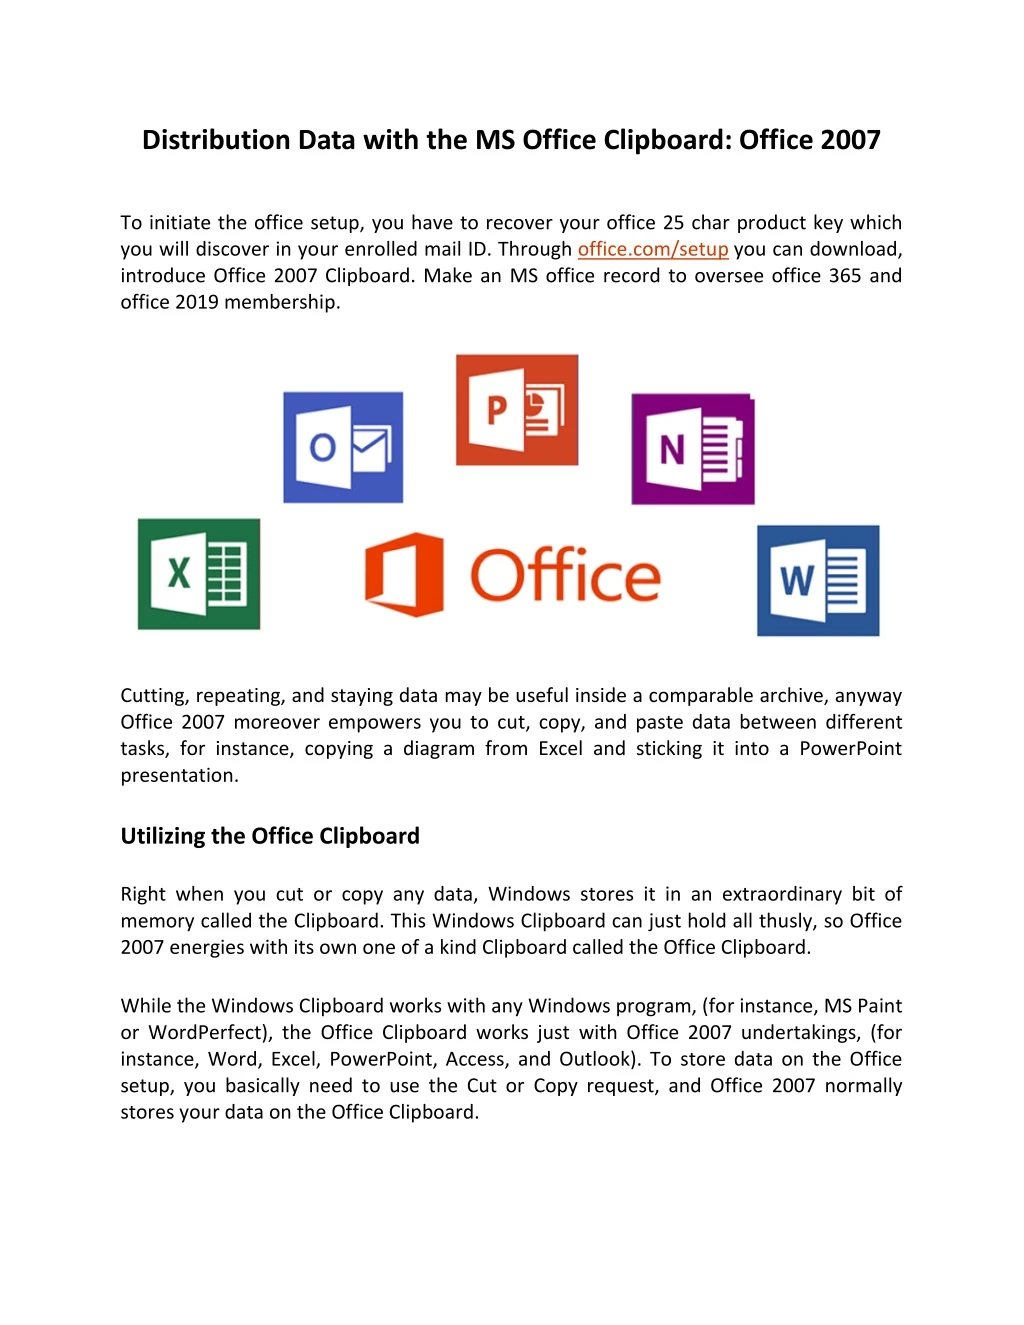 distribution data with the ms office clipboard